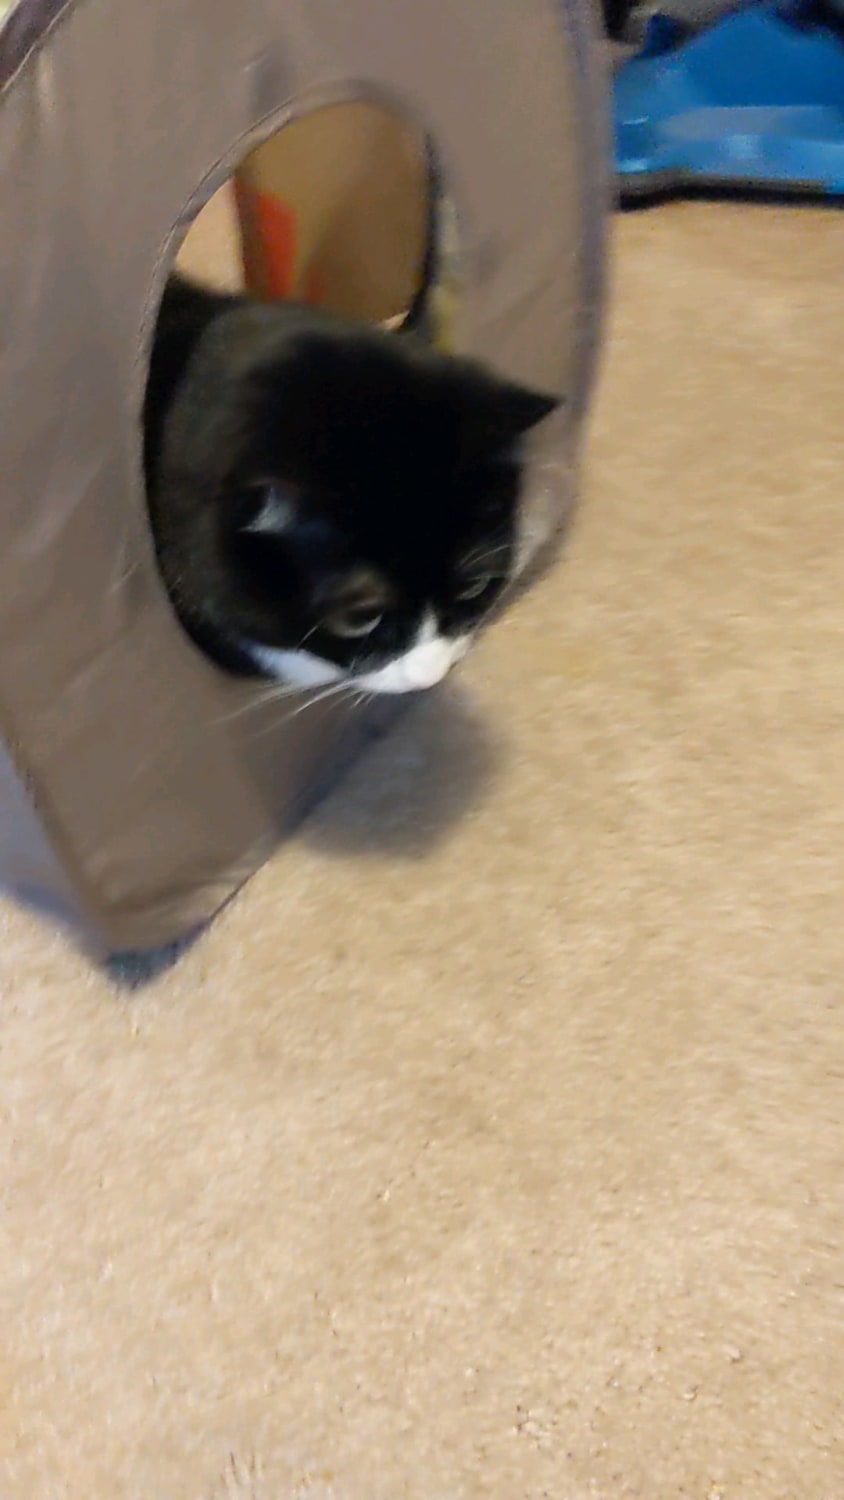 Irma yells like this even when she's not trapped in a bag handle